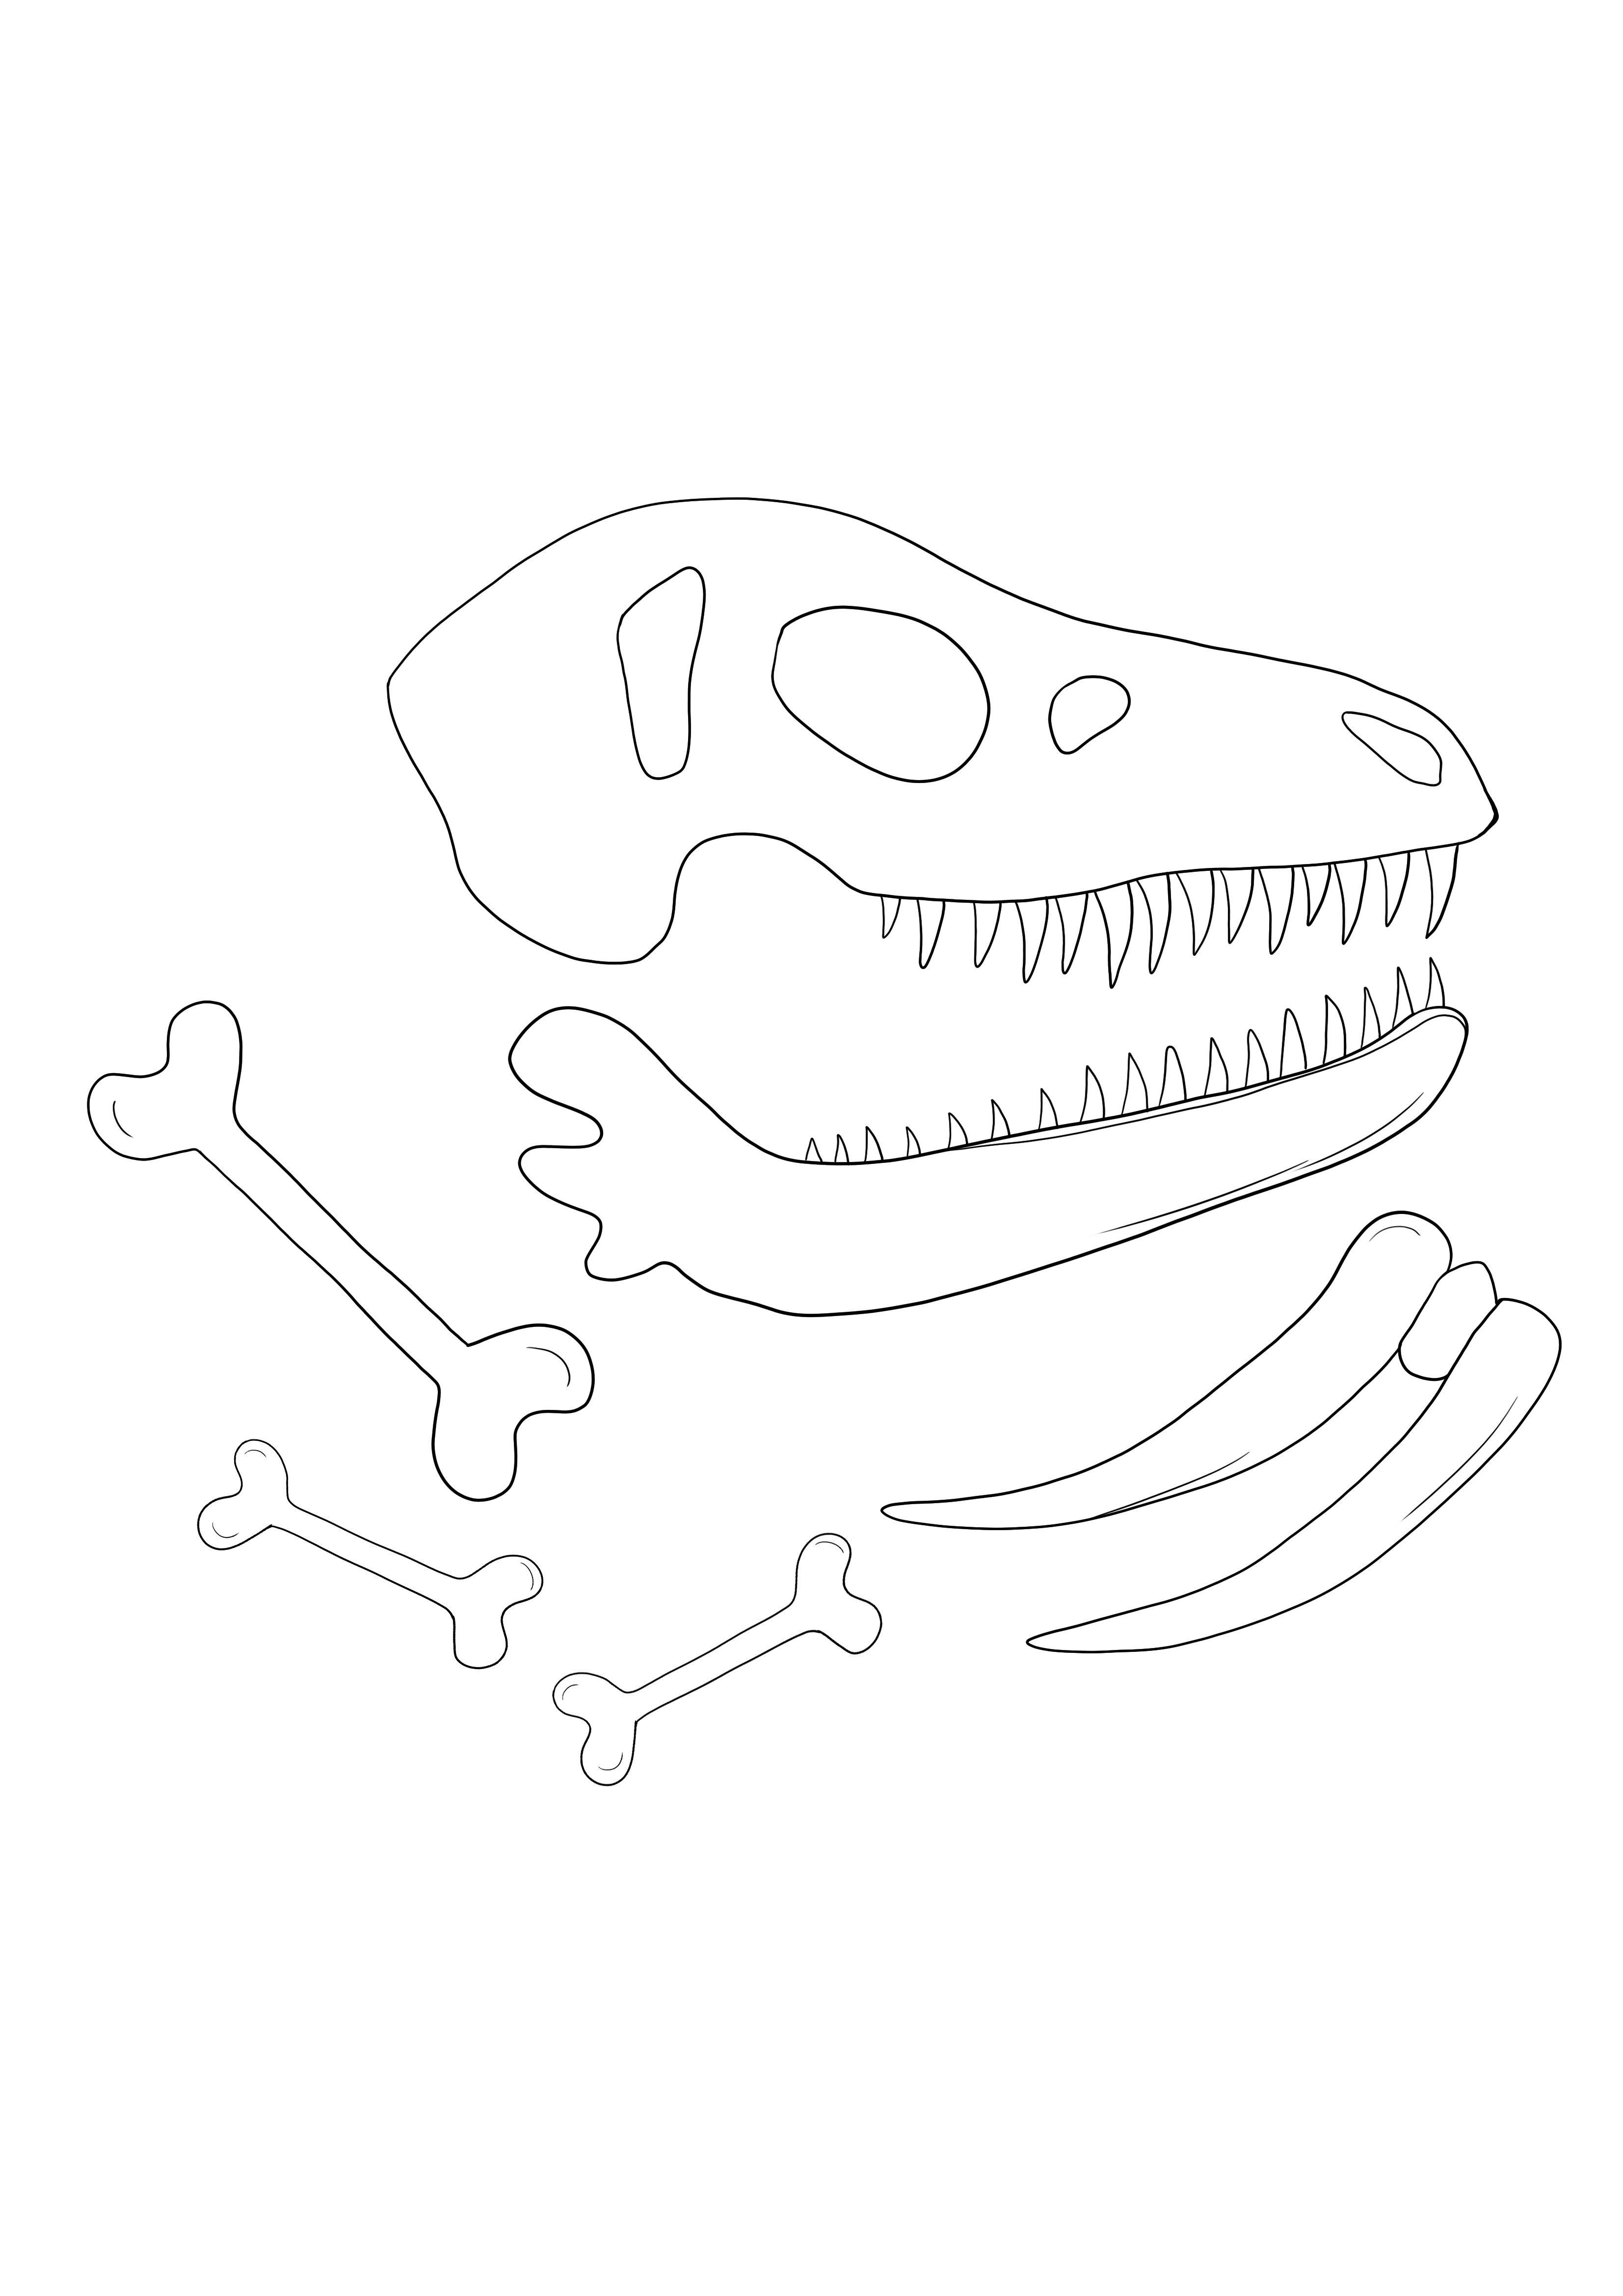 Dinosaur fossils for free download and color sheet